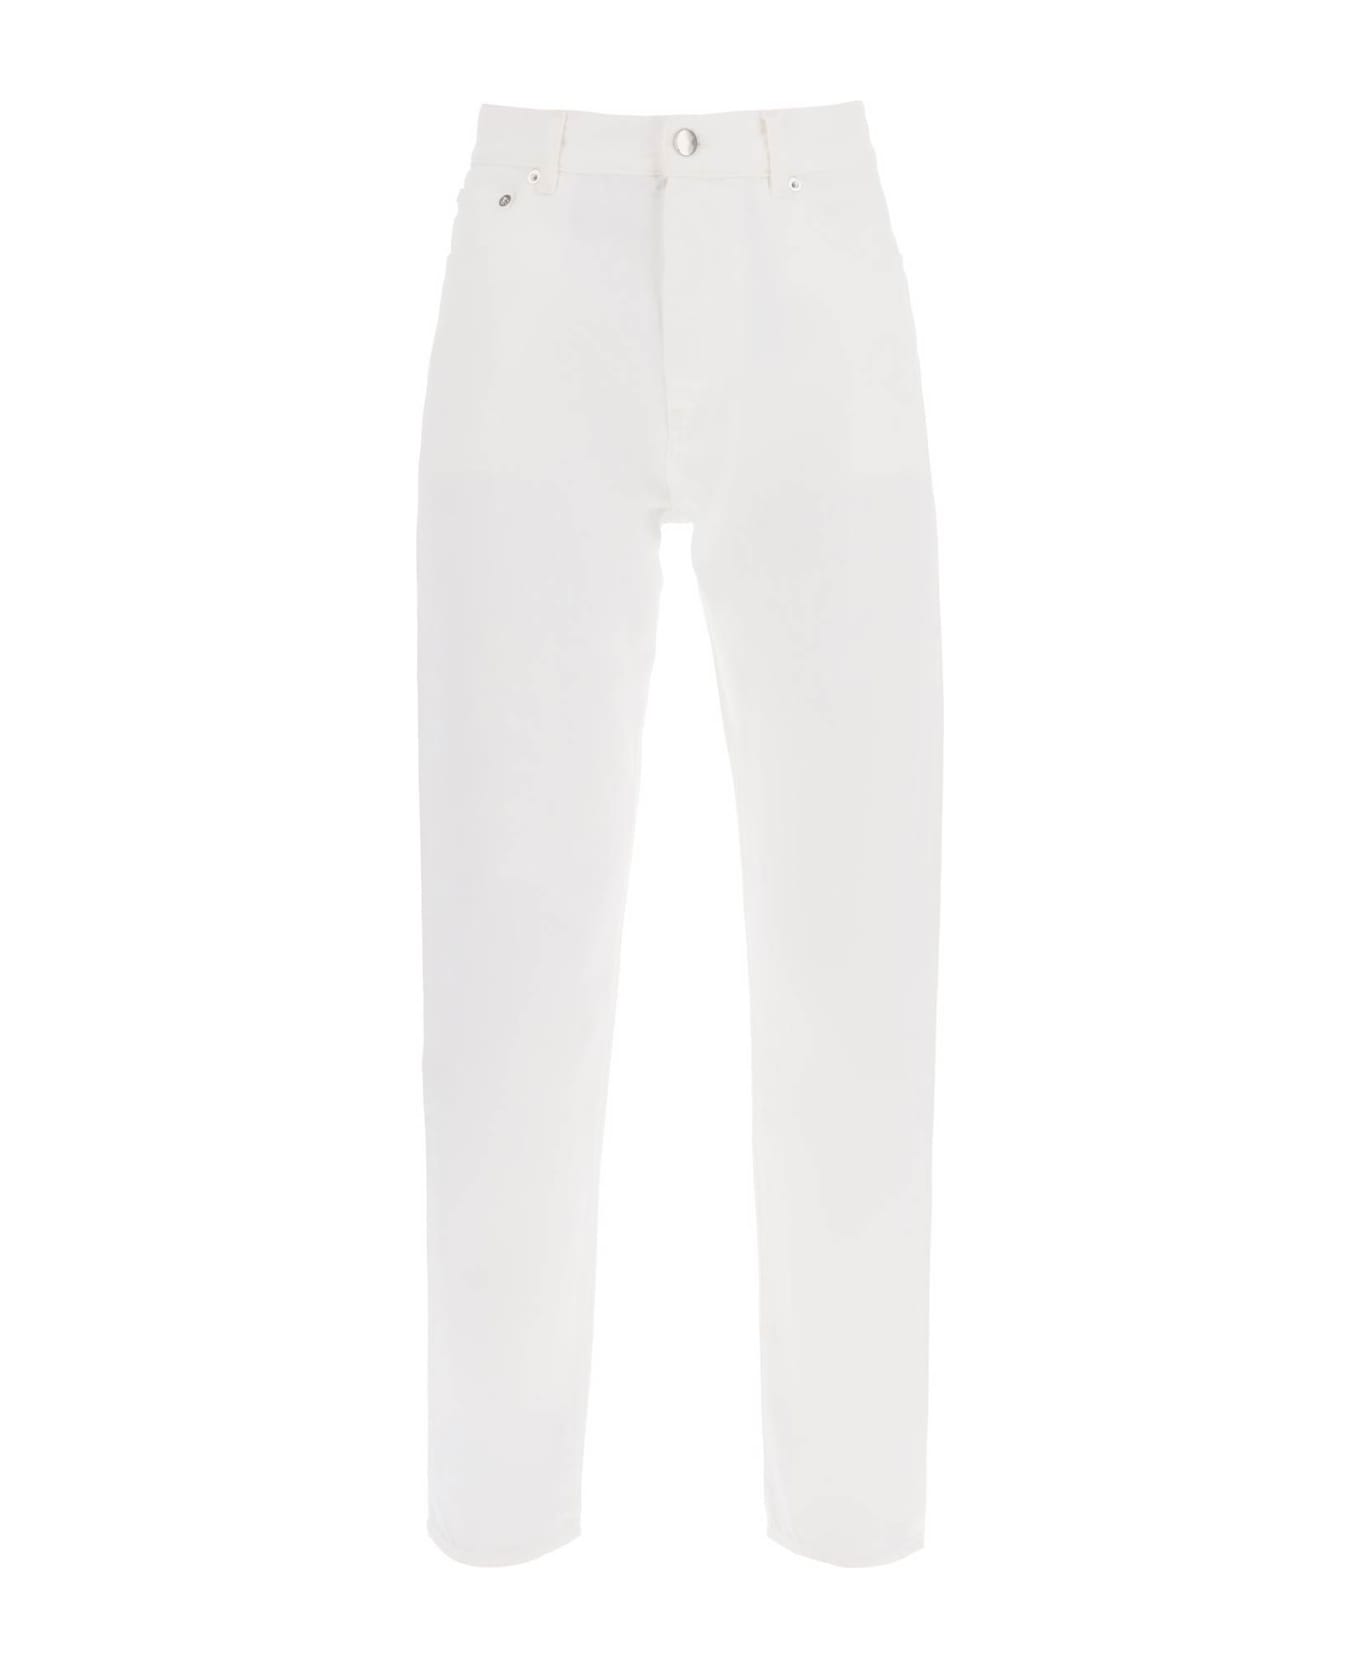 Loulou Studio Cropped Straight Cut Jeans - IVORY (White)